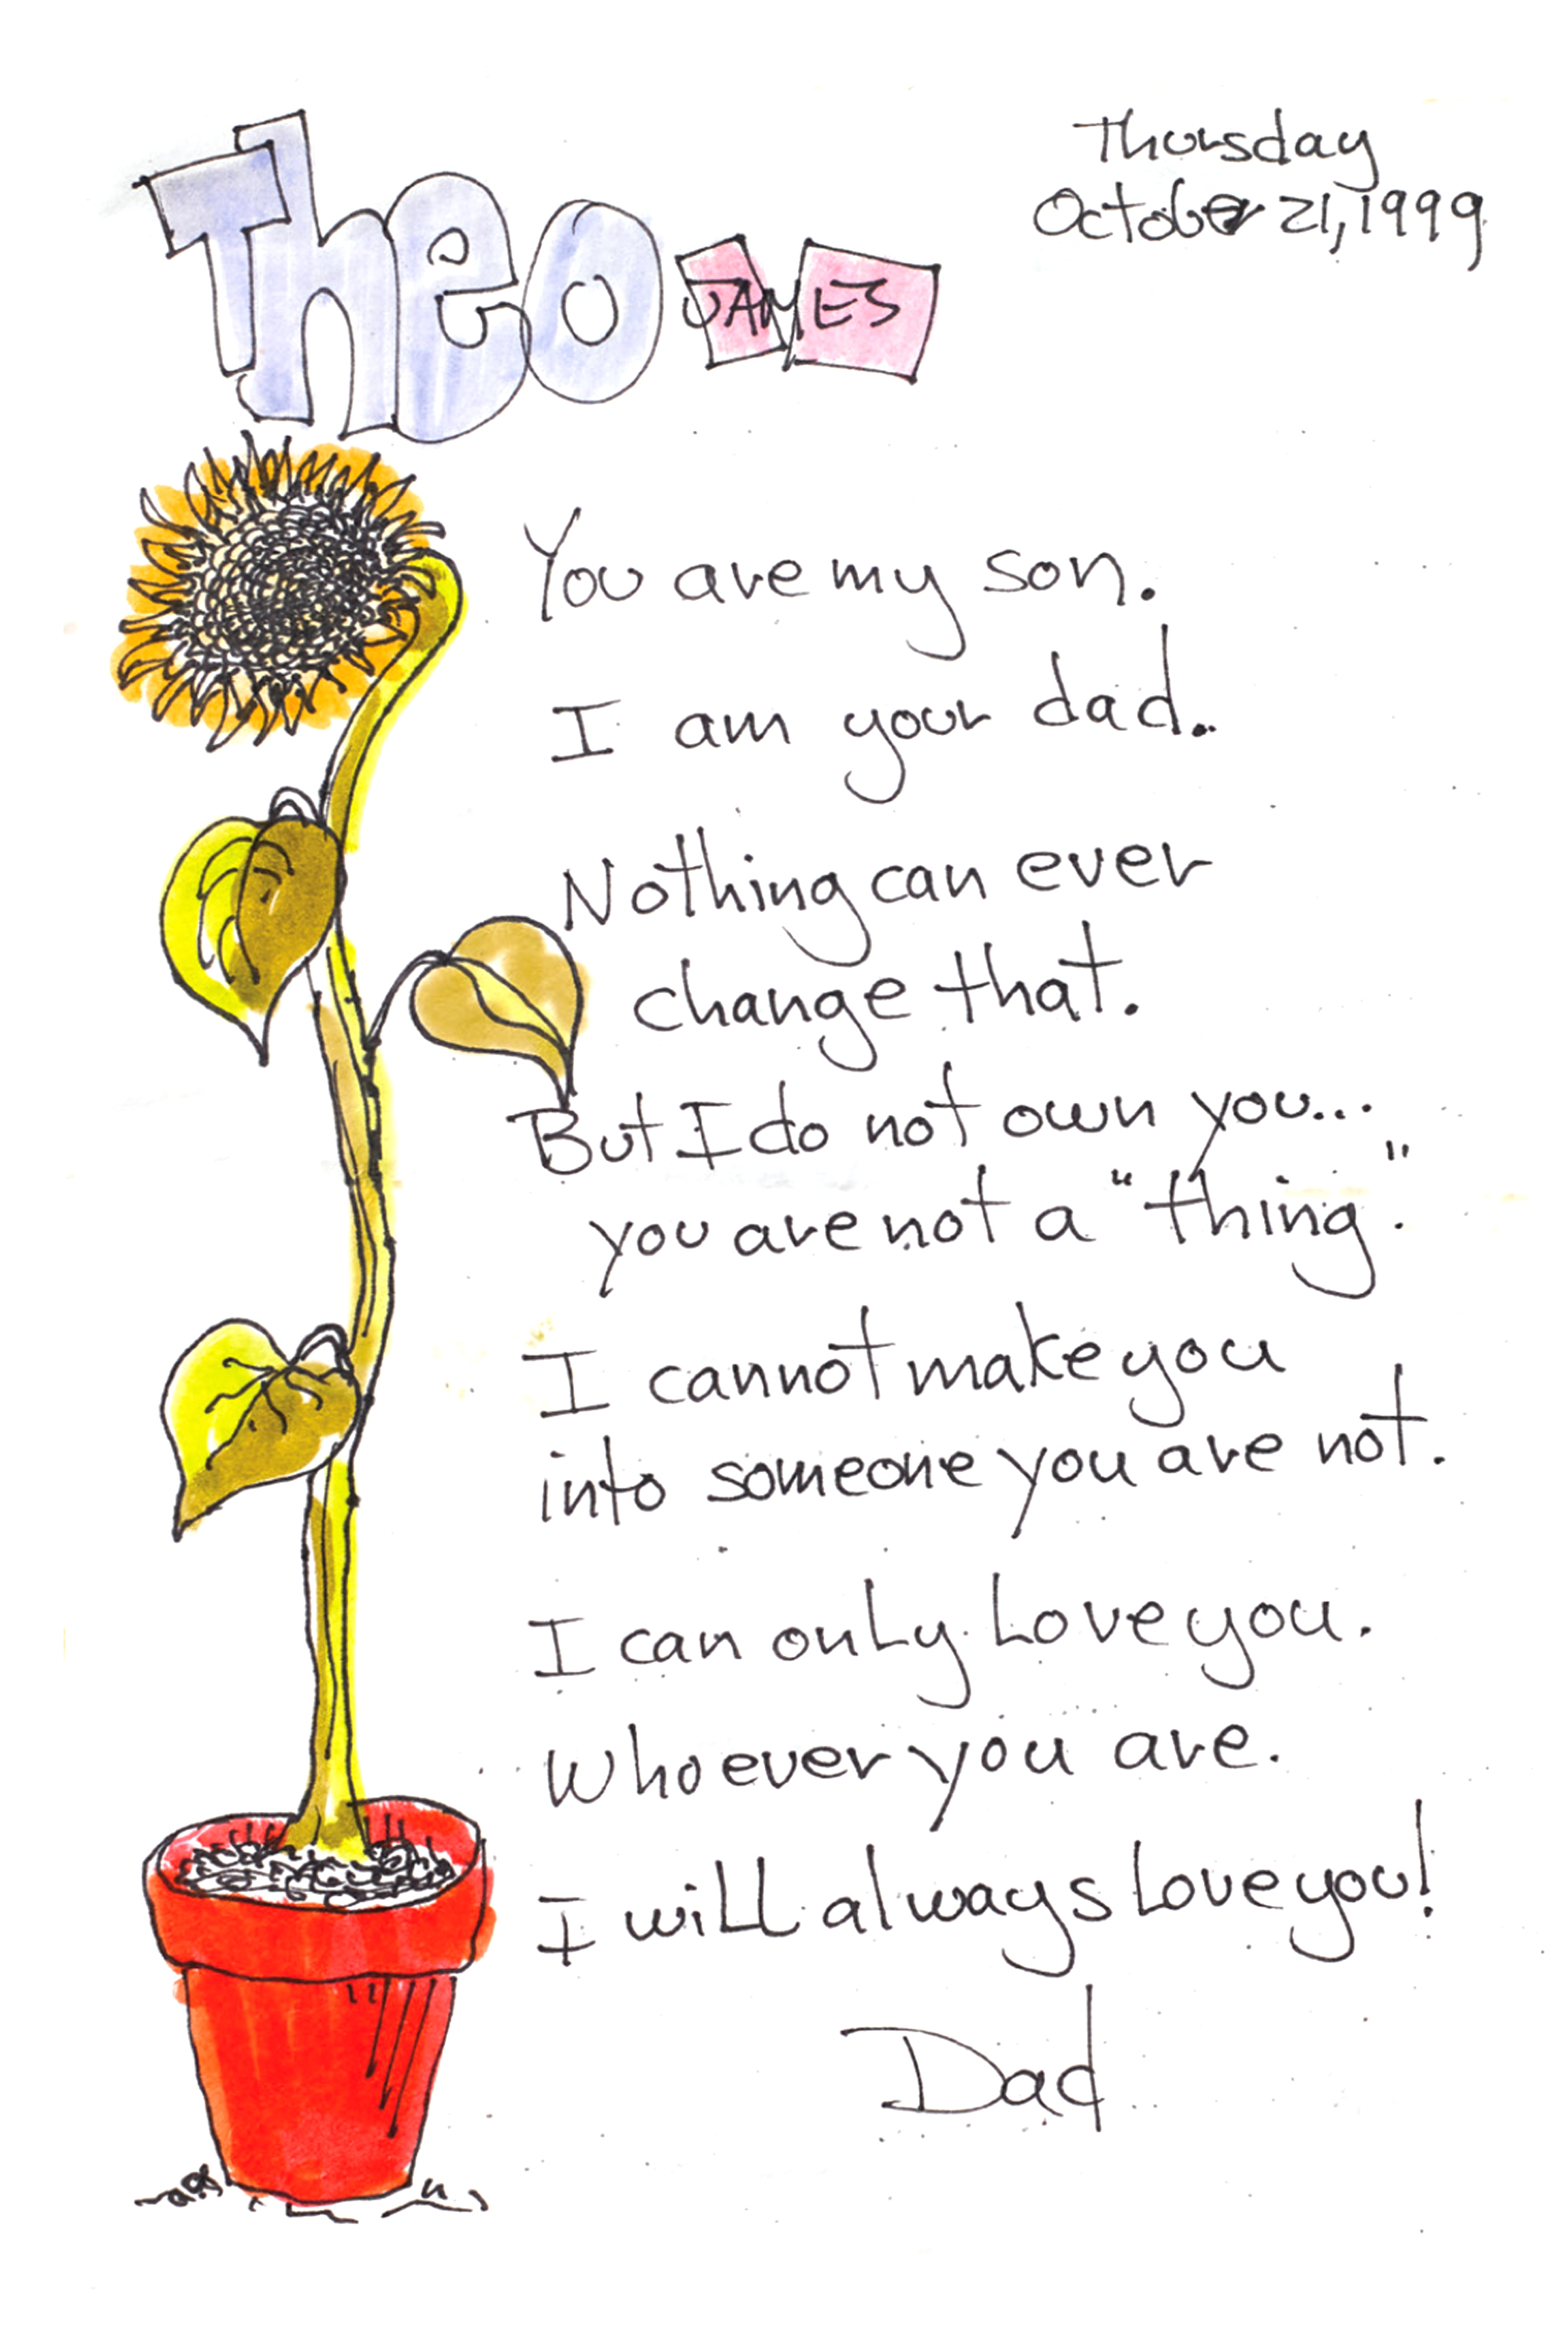 A heartfelt handwritten note on a page with a drawing of a sunflower in a pot, signed "dad" with a date: thursday, october 21, 1999. the message expresses a father's unconditional love and acceptance of his son theo.